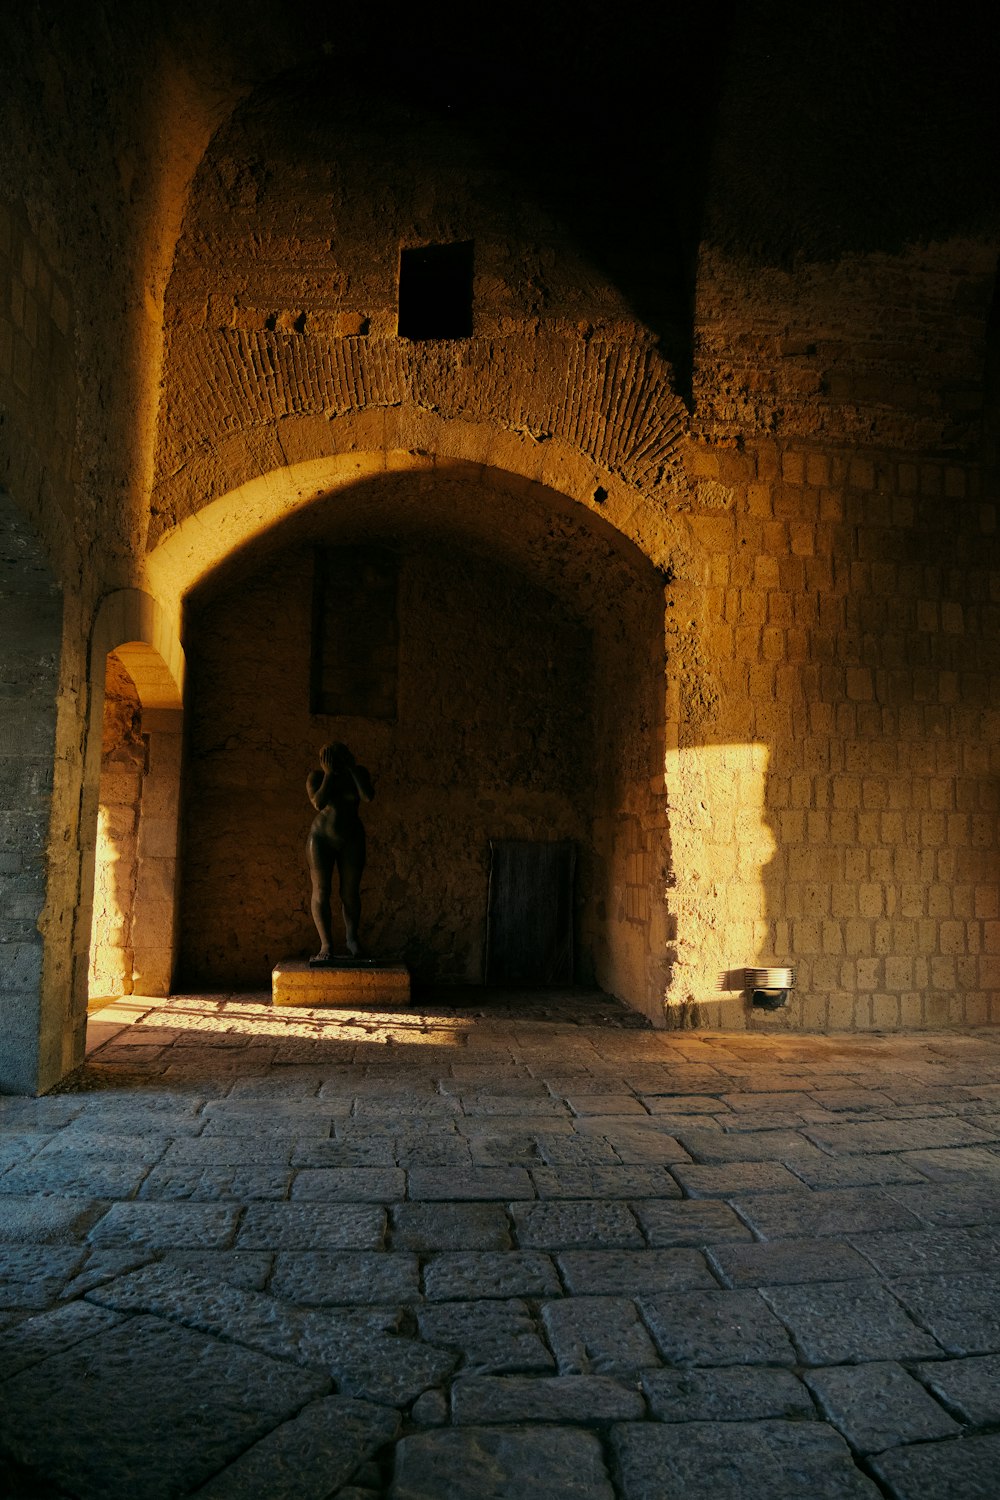 a person standing in a doorway